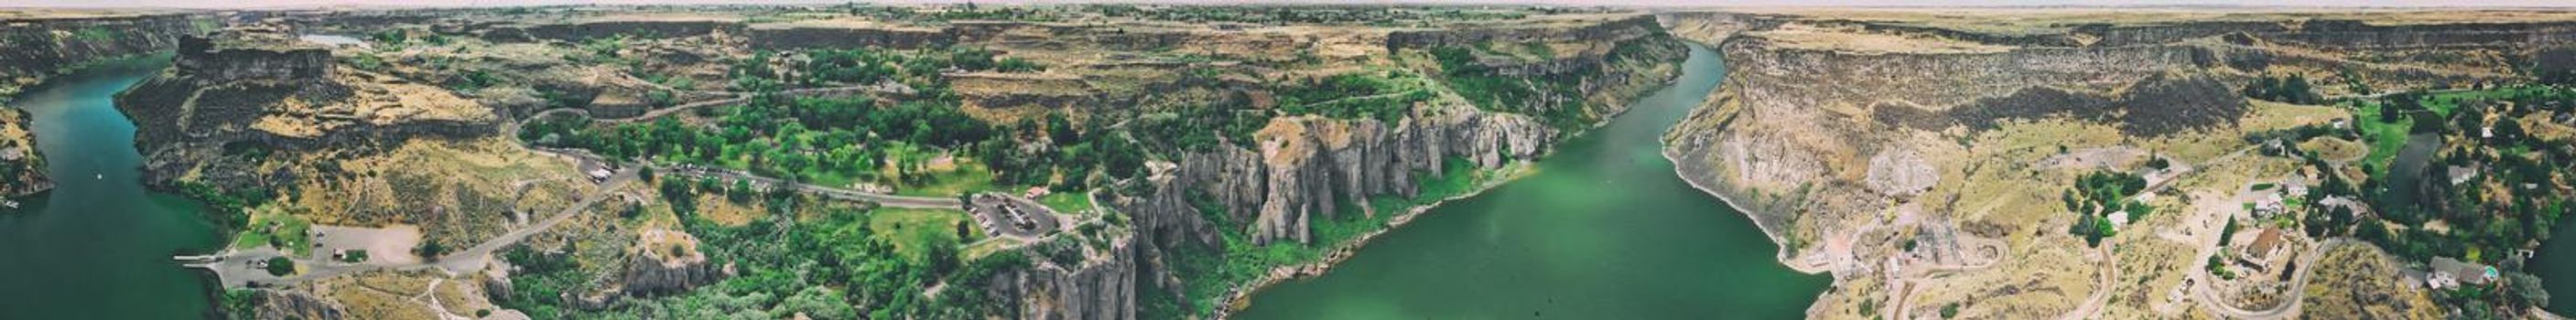 Aerial view of Shoshone Falls in summer season from drone viewpoint, Idaho, USA.